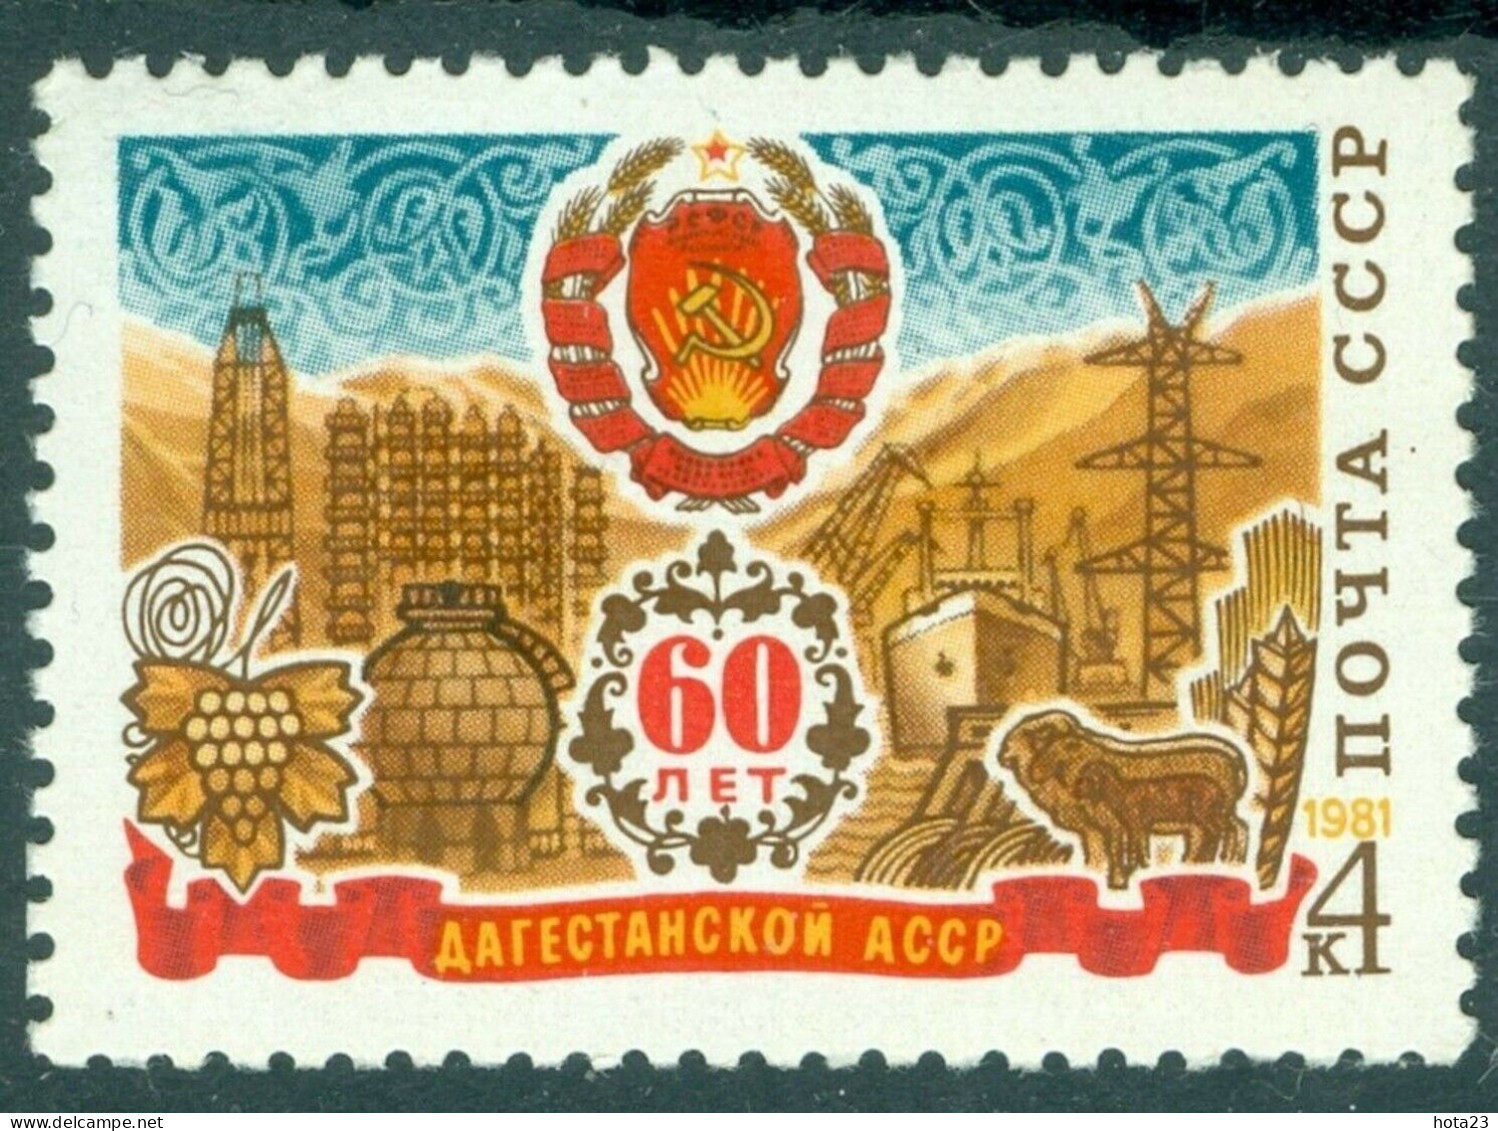 Russia 1981 Dagestan,coat Of Arms,oil Derrick,industry,harbour, Ship,Mi.5031,MNH - Unused Stamps